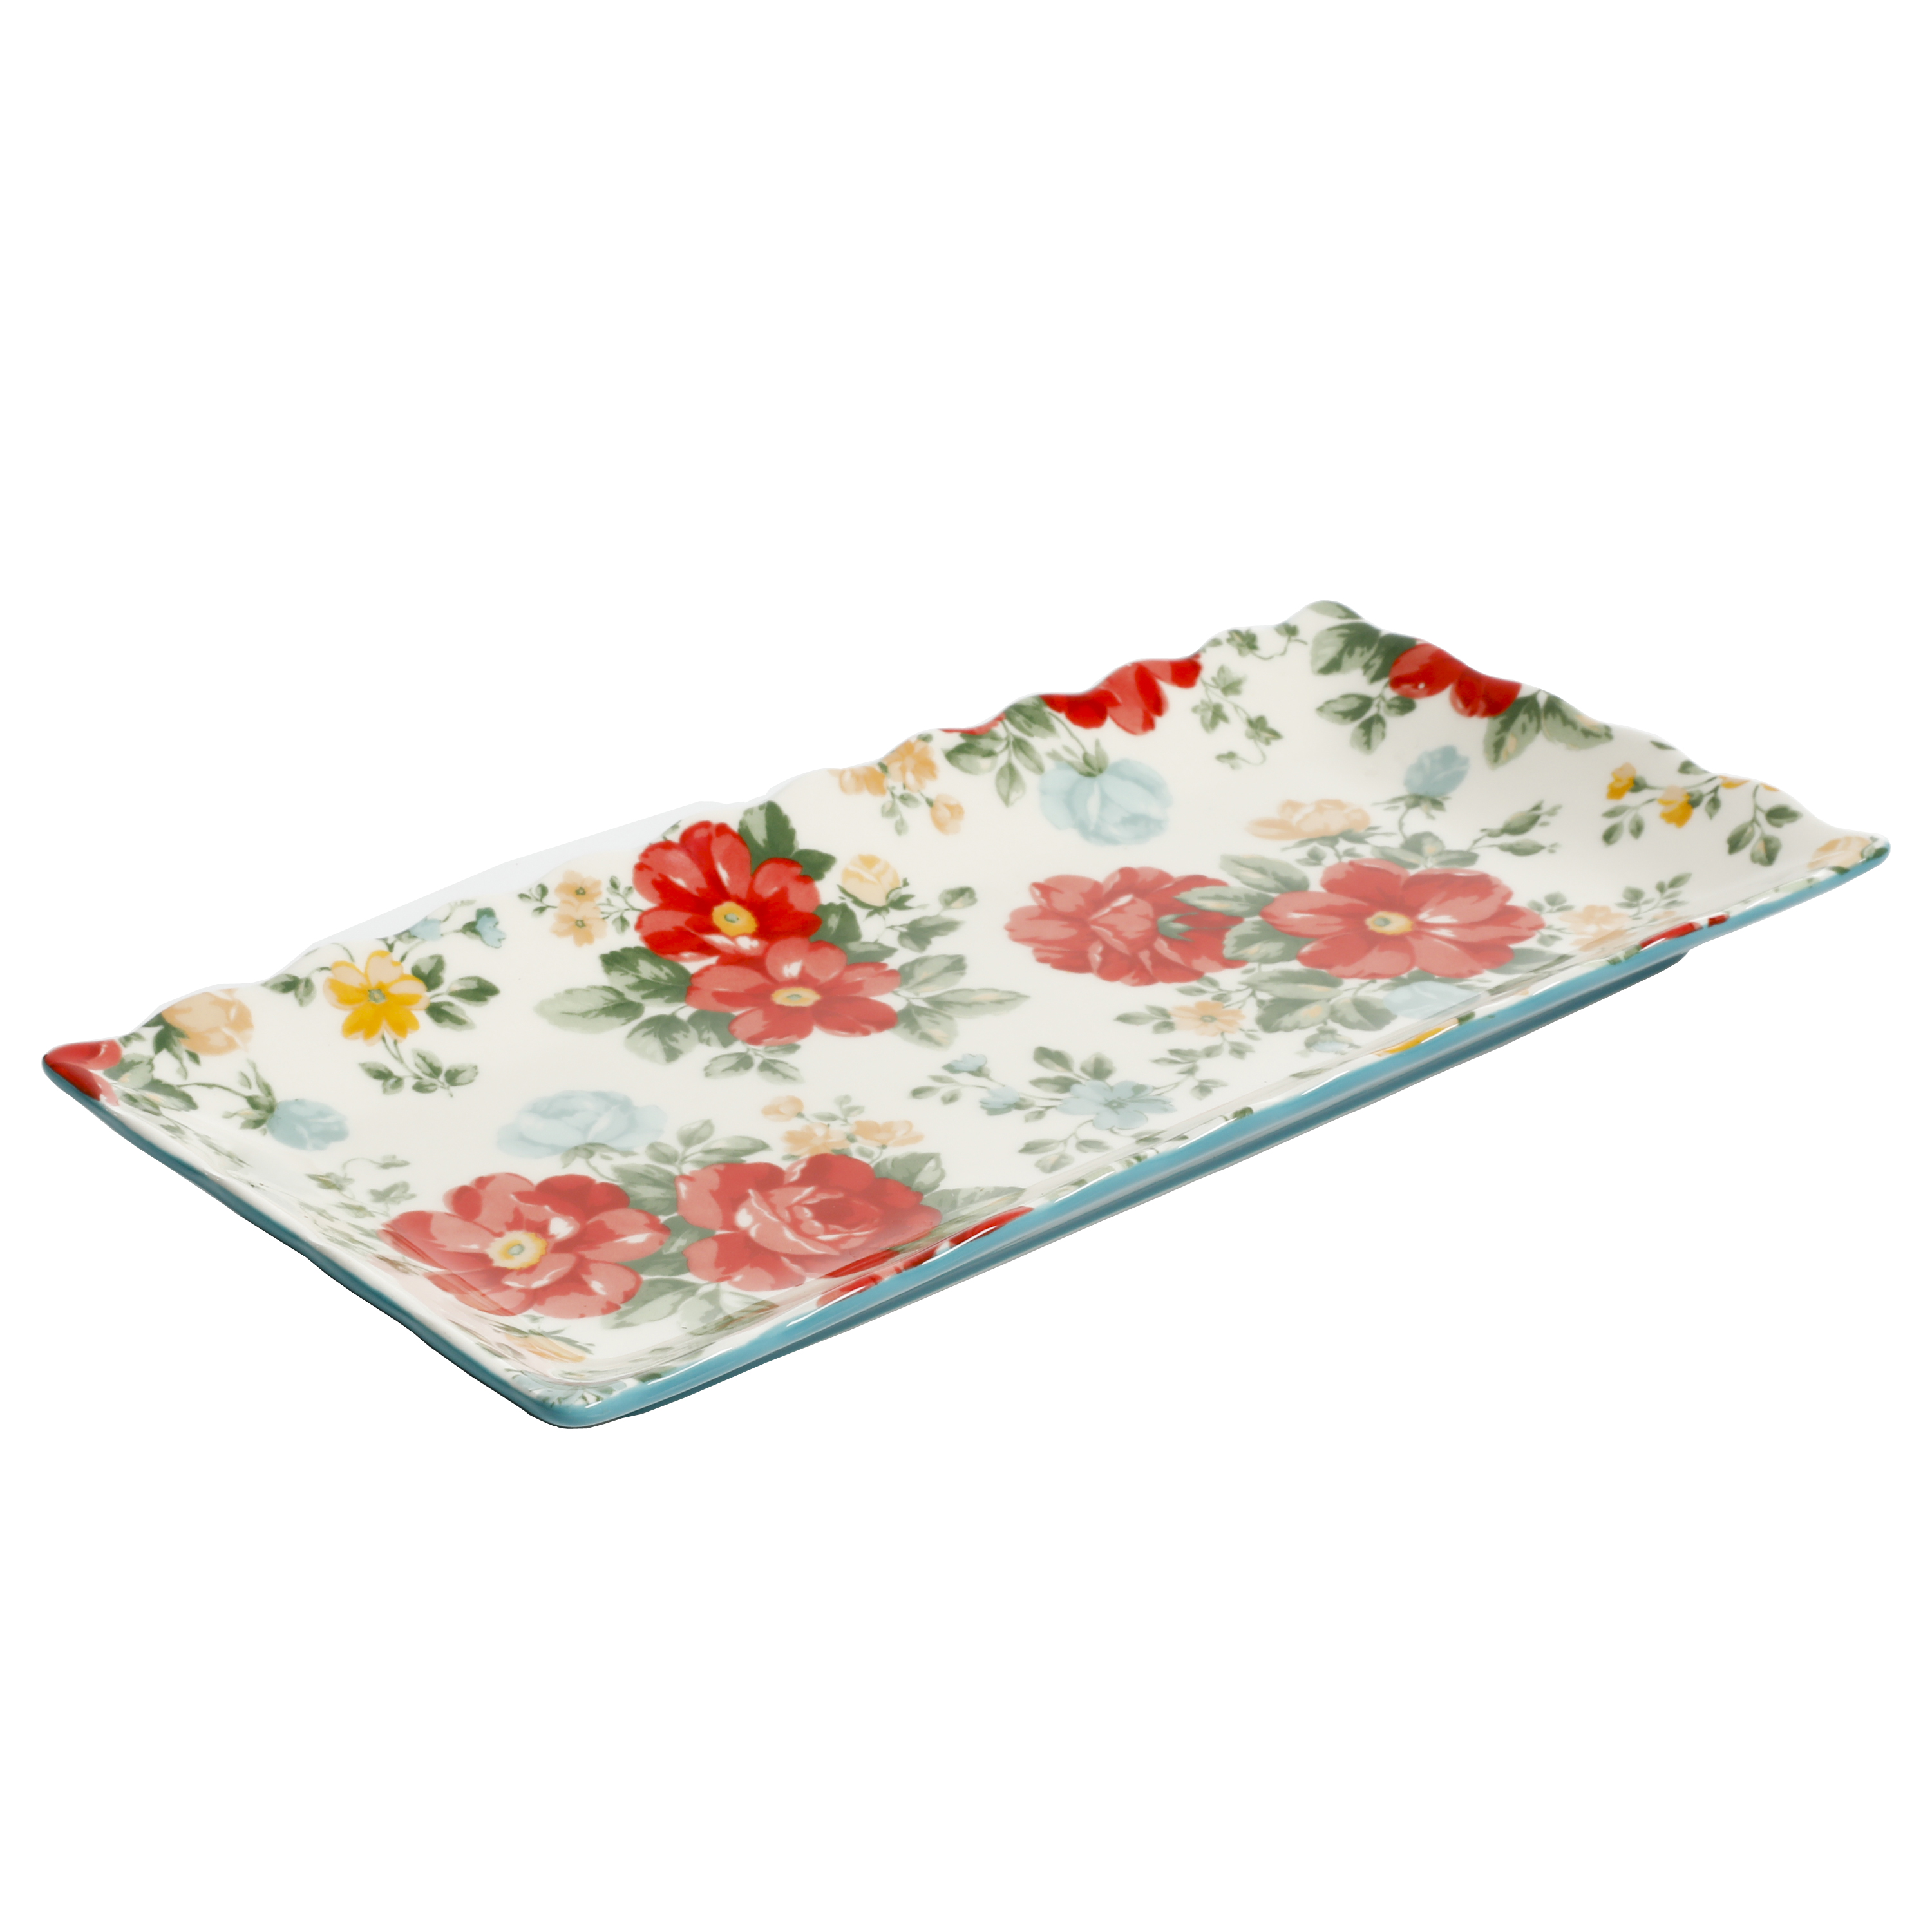 The Pioneer Woman Floral Medley 3-Piece Serving Platters - image 3 of 8